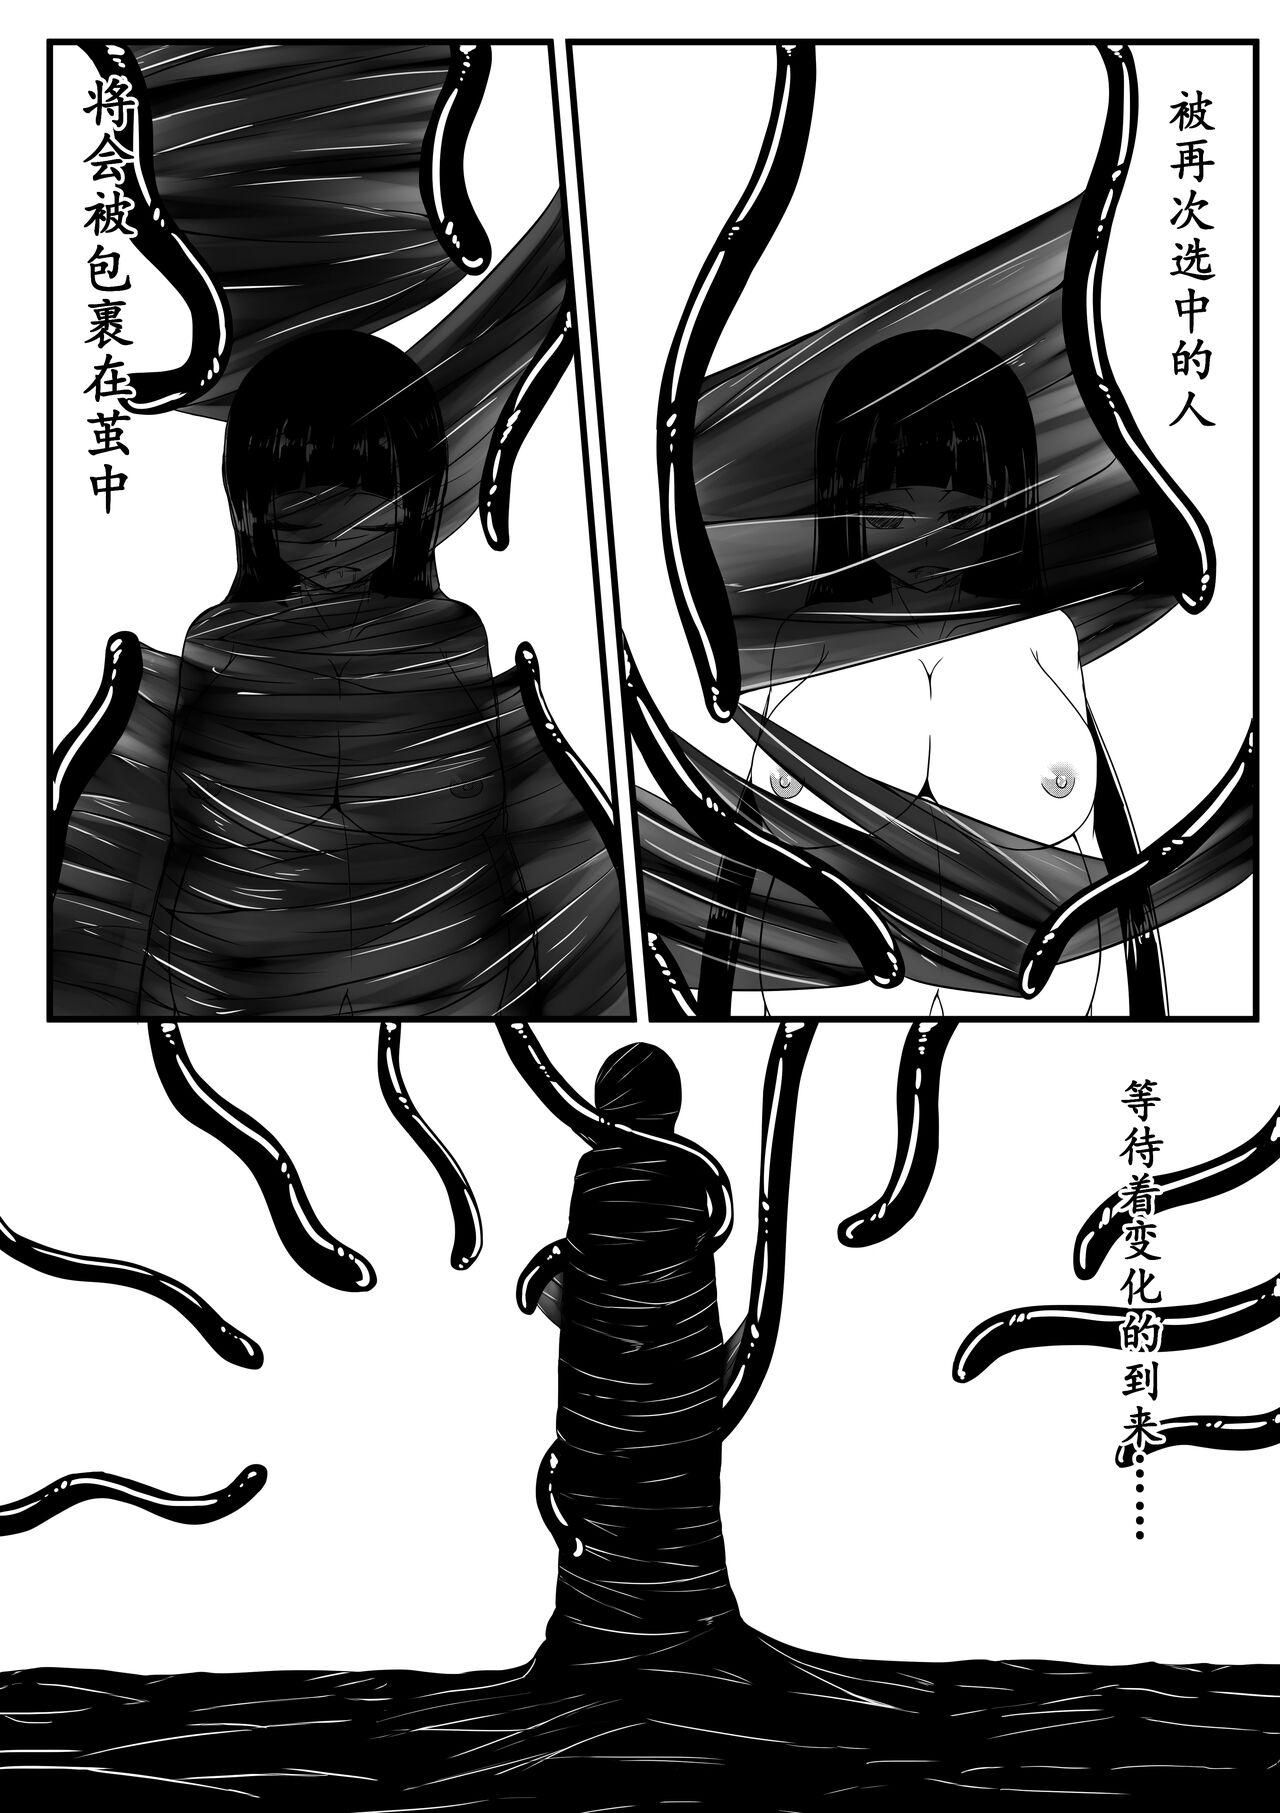 Chileno 天球的祭品 Gay Outinpublic - Page 6